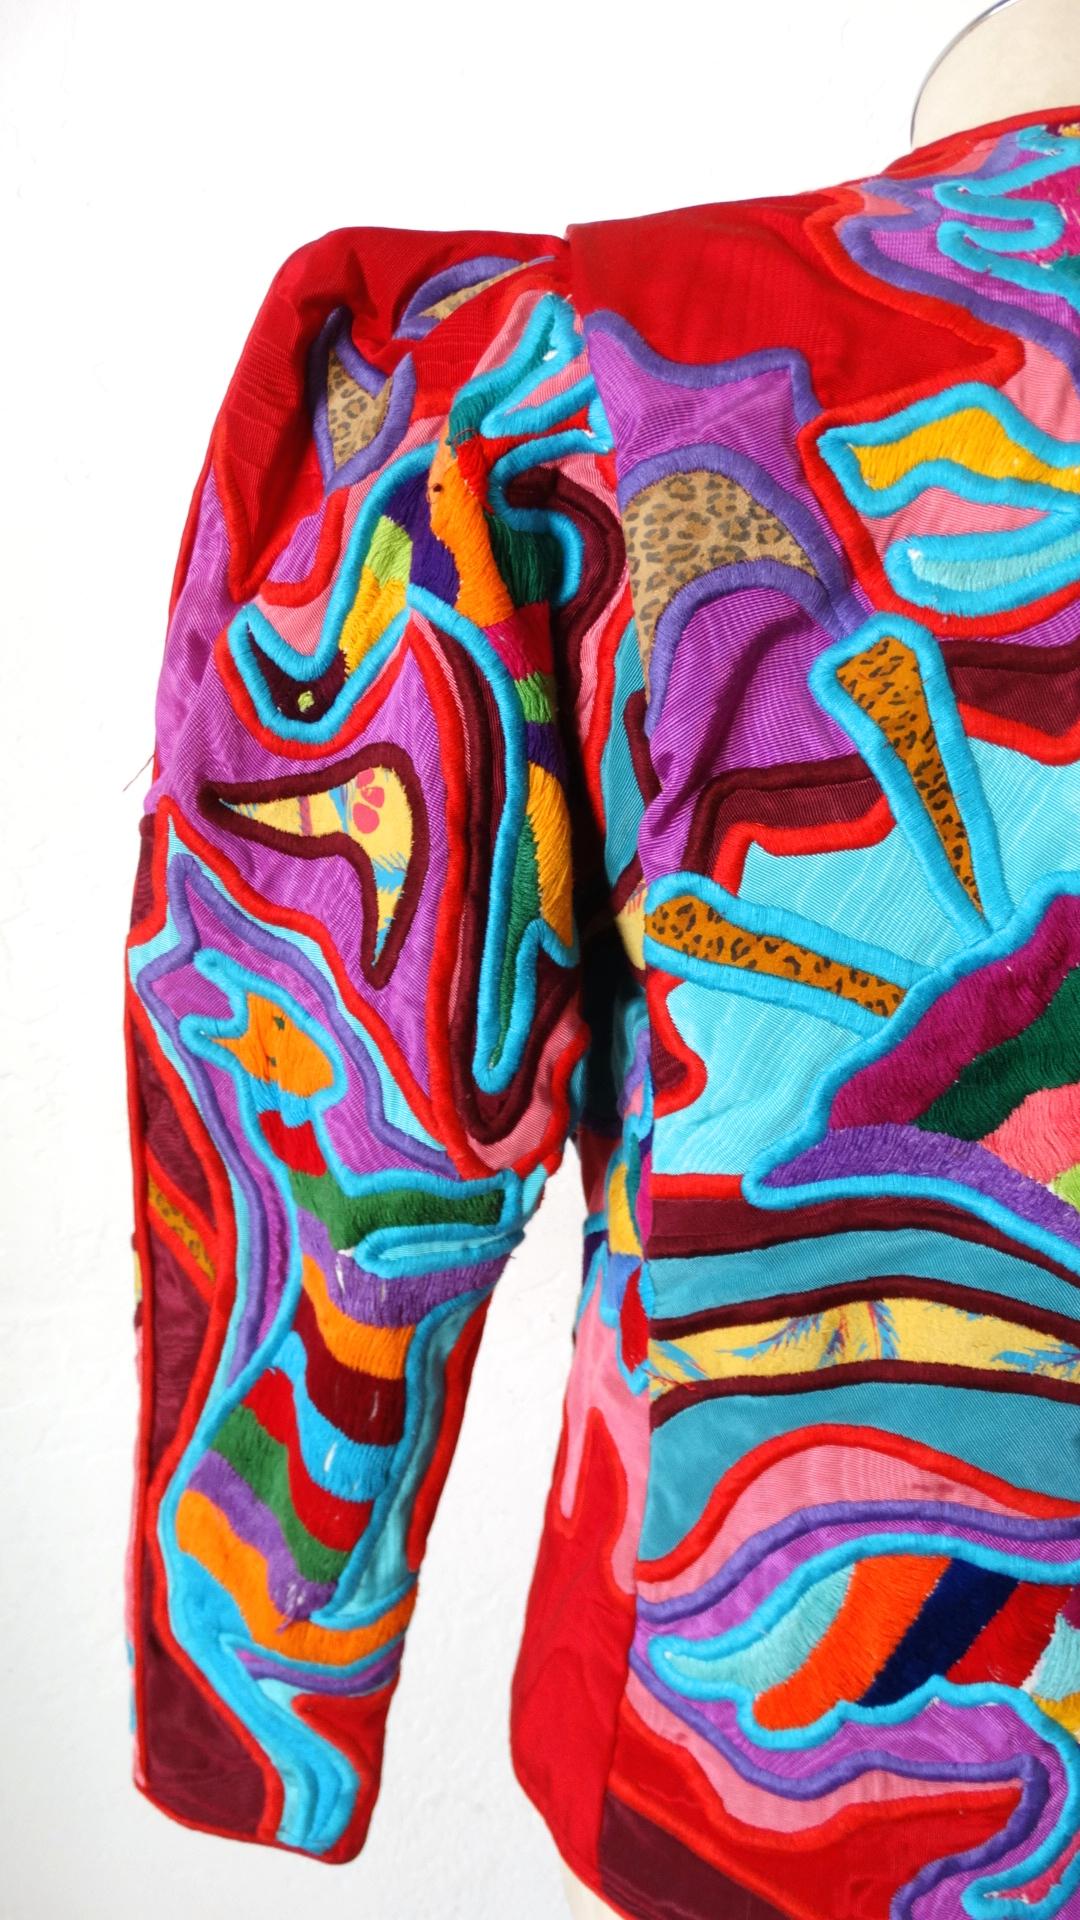 The Most Unique Jacket Is Here! Circa 1980s, this Judith Roberts jacket features amazing appliqué patchwork made up of abstract designs in bright colors, and a variety of beautiful fabrics. Includes large silver buttons with small polka dots and an